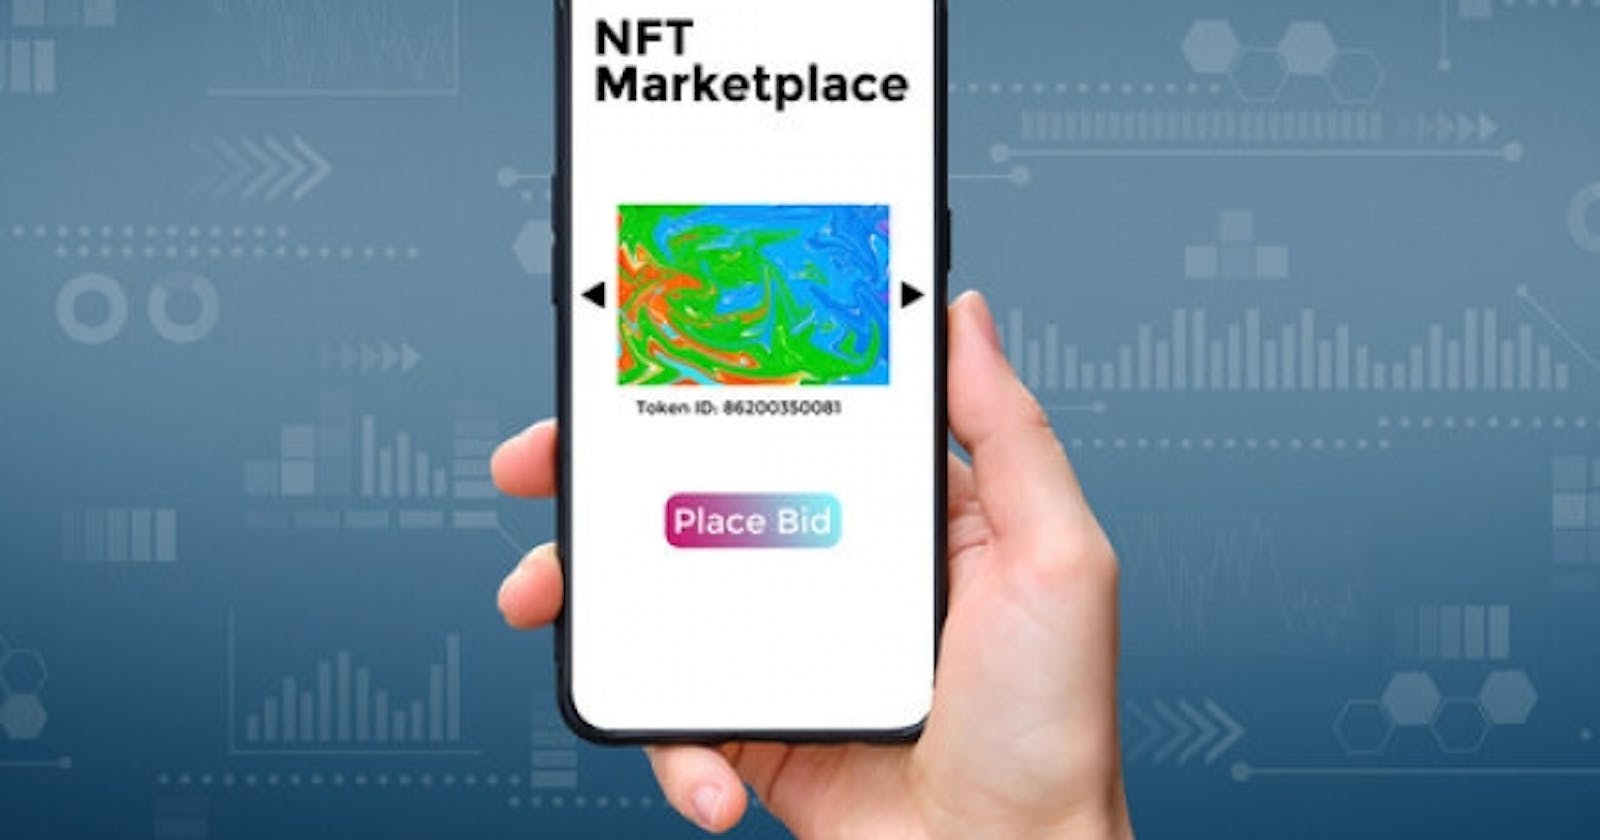 Are NFT Marketplace Development Solutions the Future of Trading?